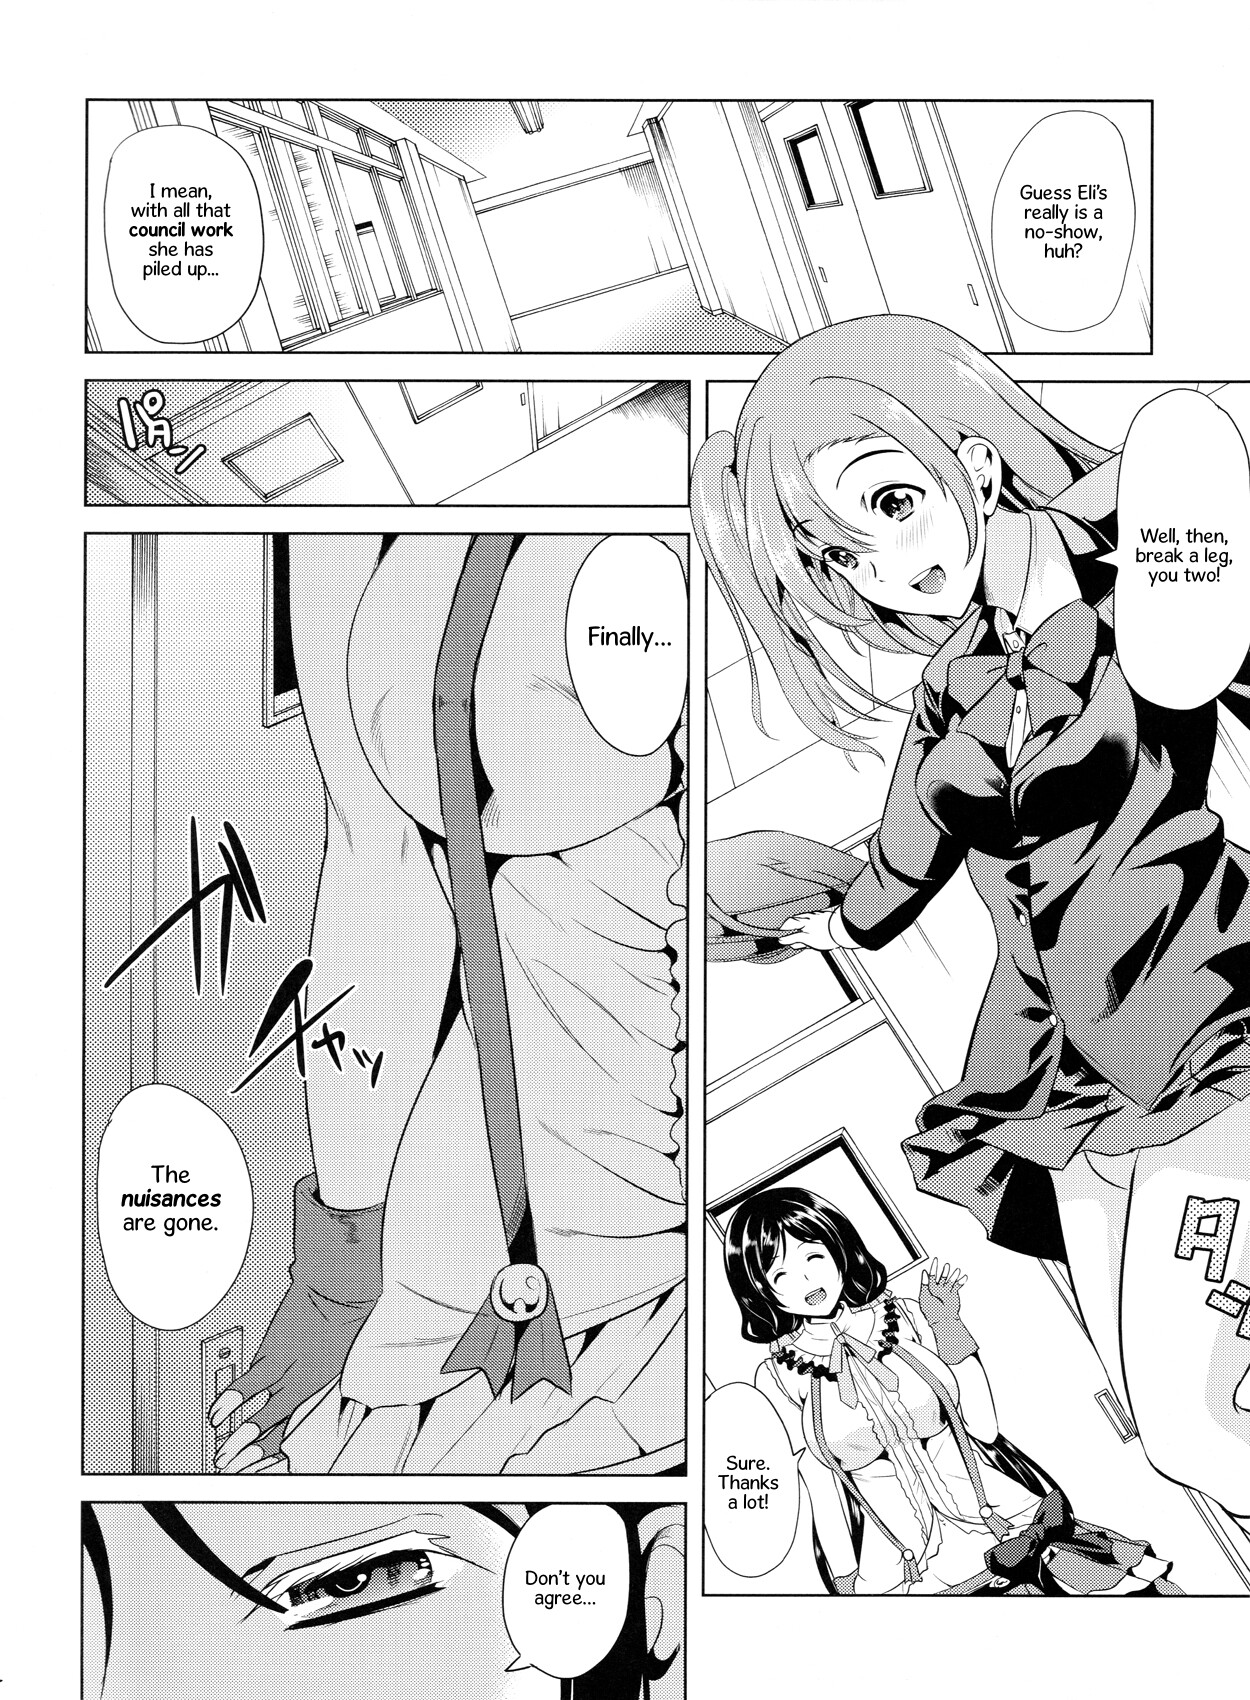 Hentai Manga Comic-I Want Elichi!! By Any and All Means...-Read-3